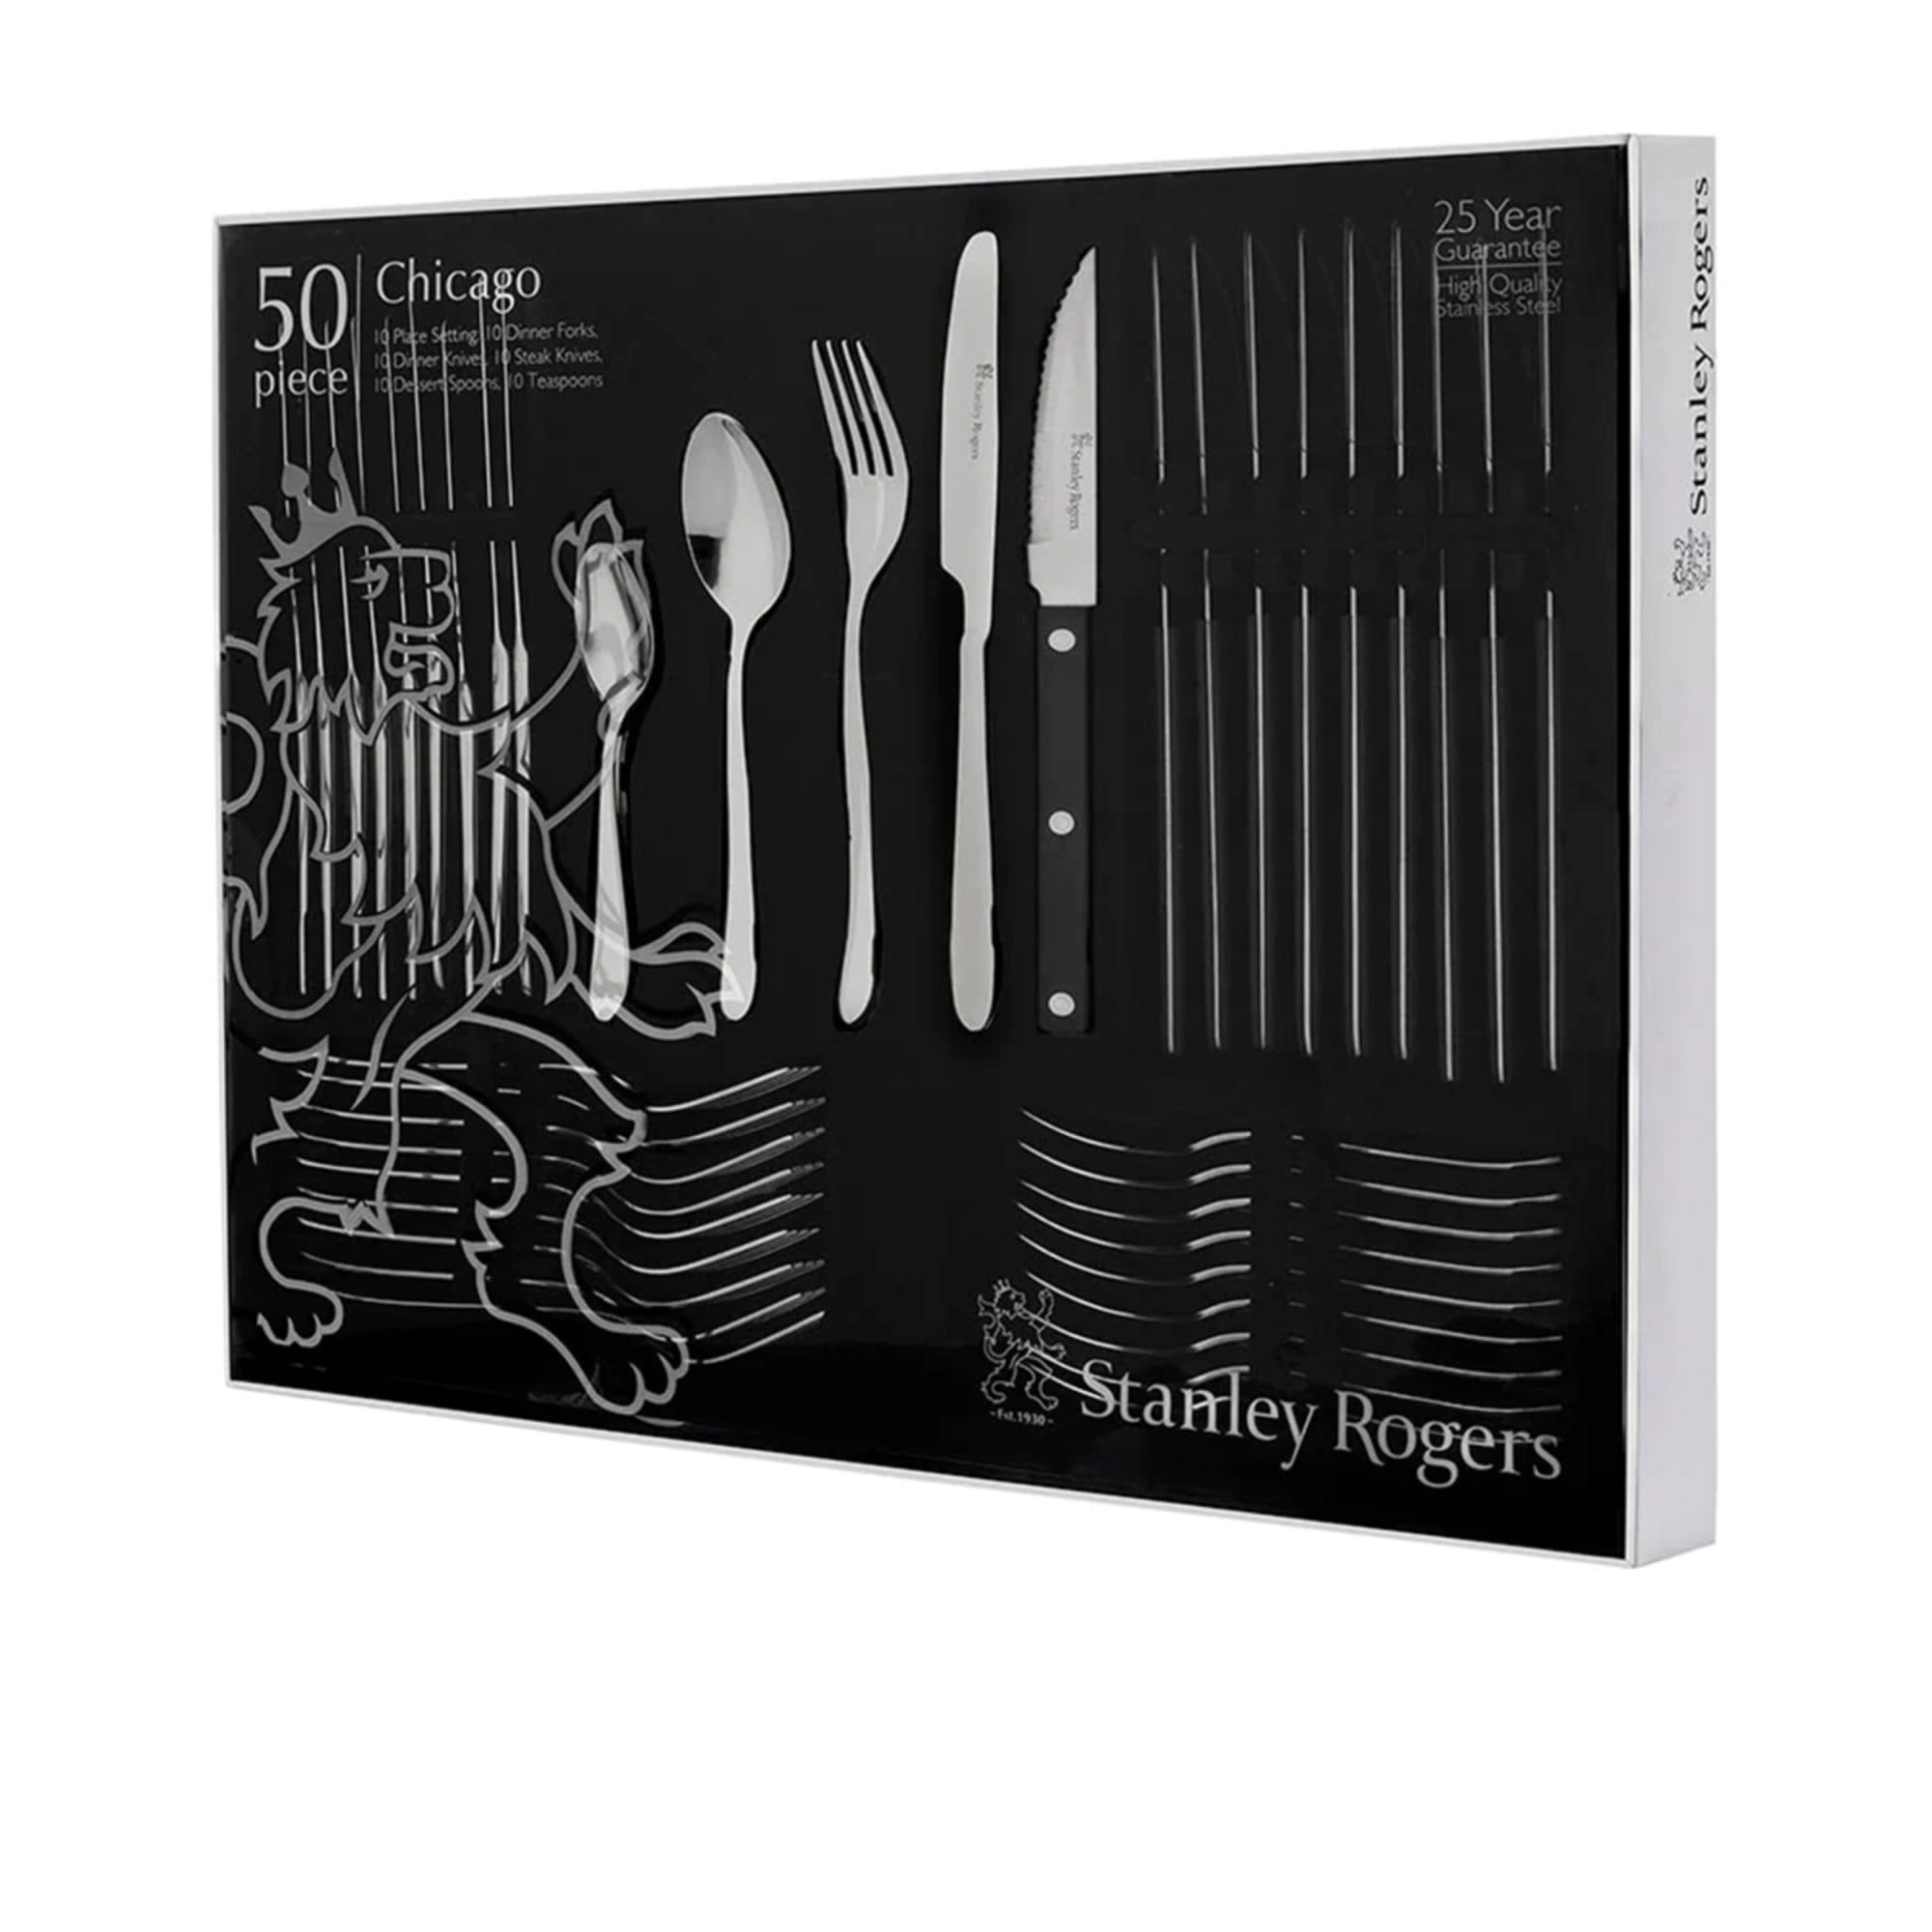 Stanley Rogers Chicago Cutlery Set with Rivetted Steak Knives 50pc Silver Image 4